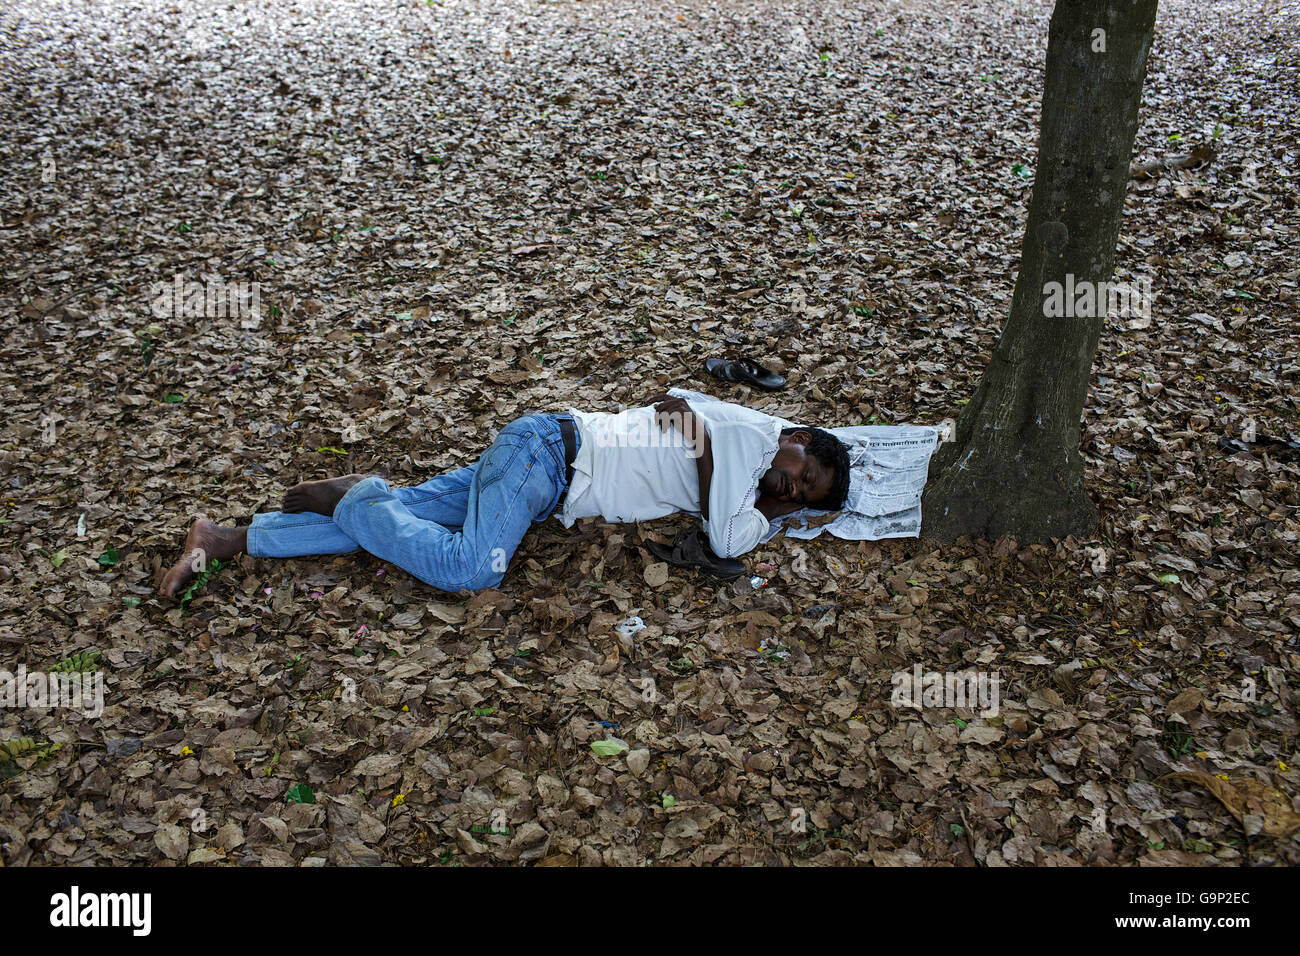 A man sleeps under a tree in a public park in Panjim, Goa, India. Stock Photo